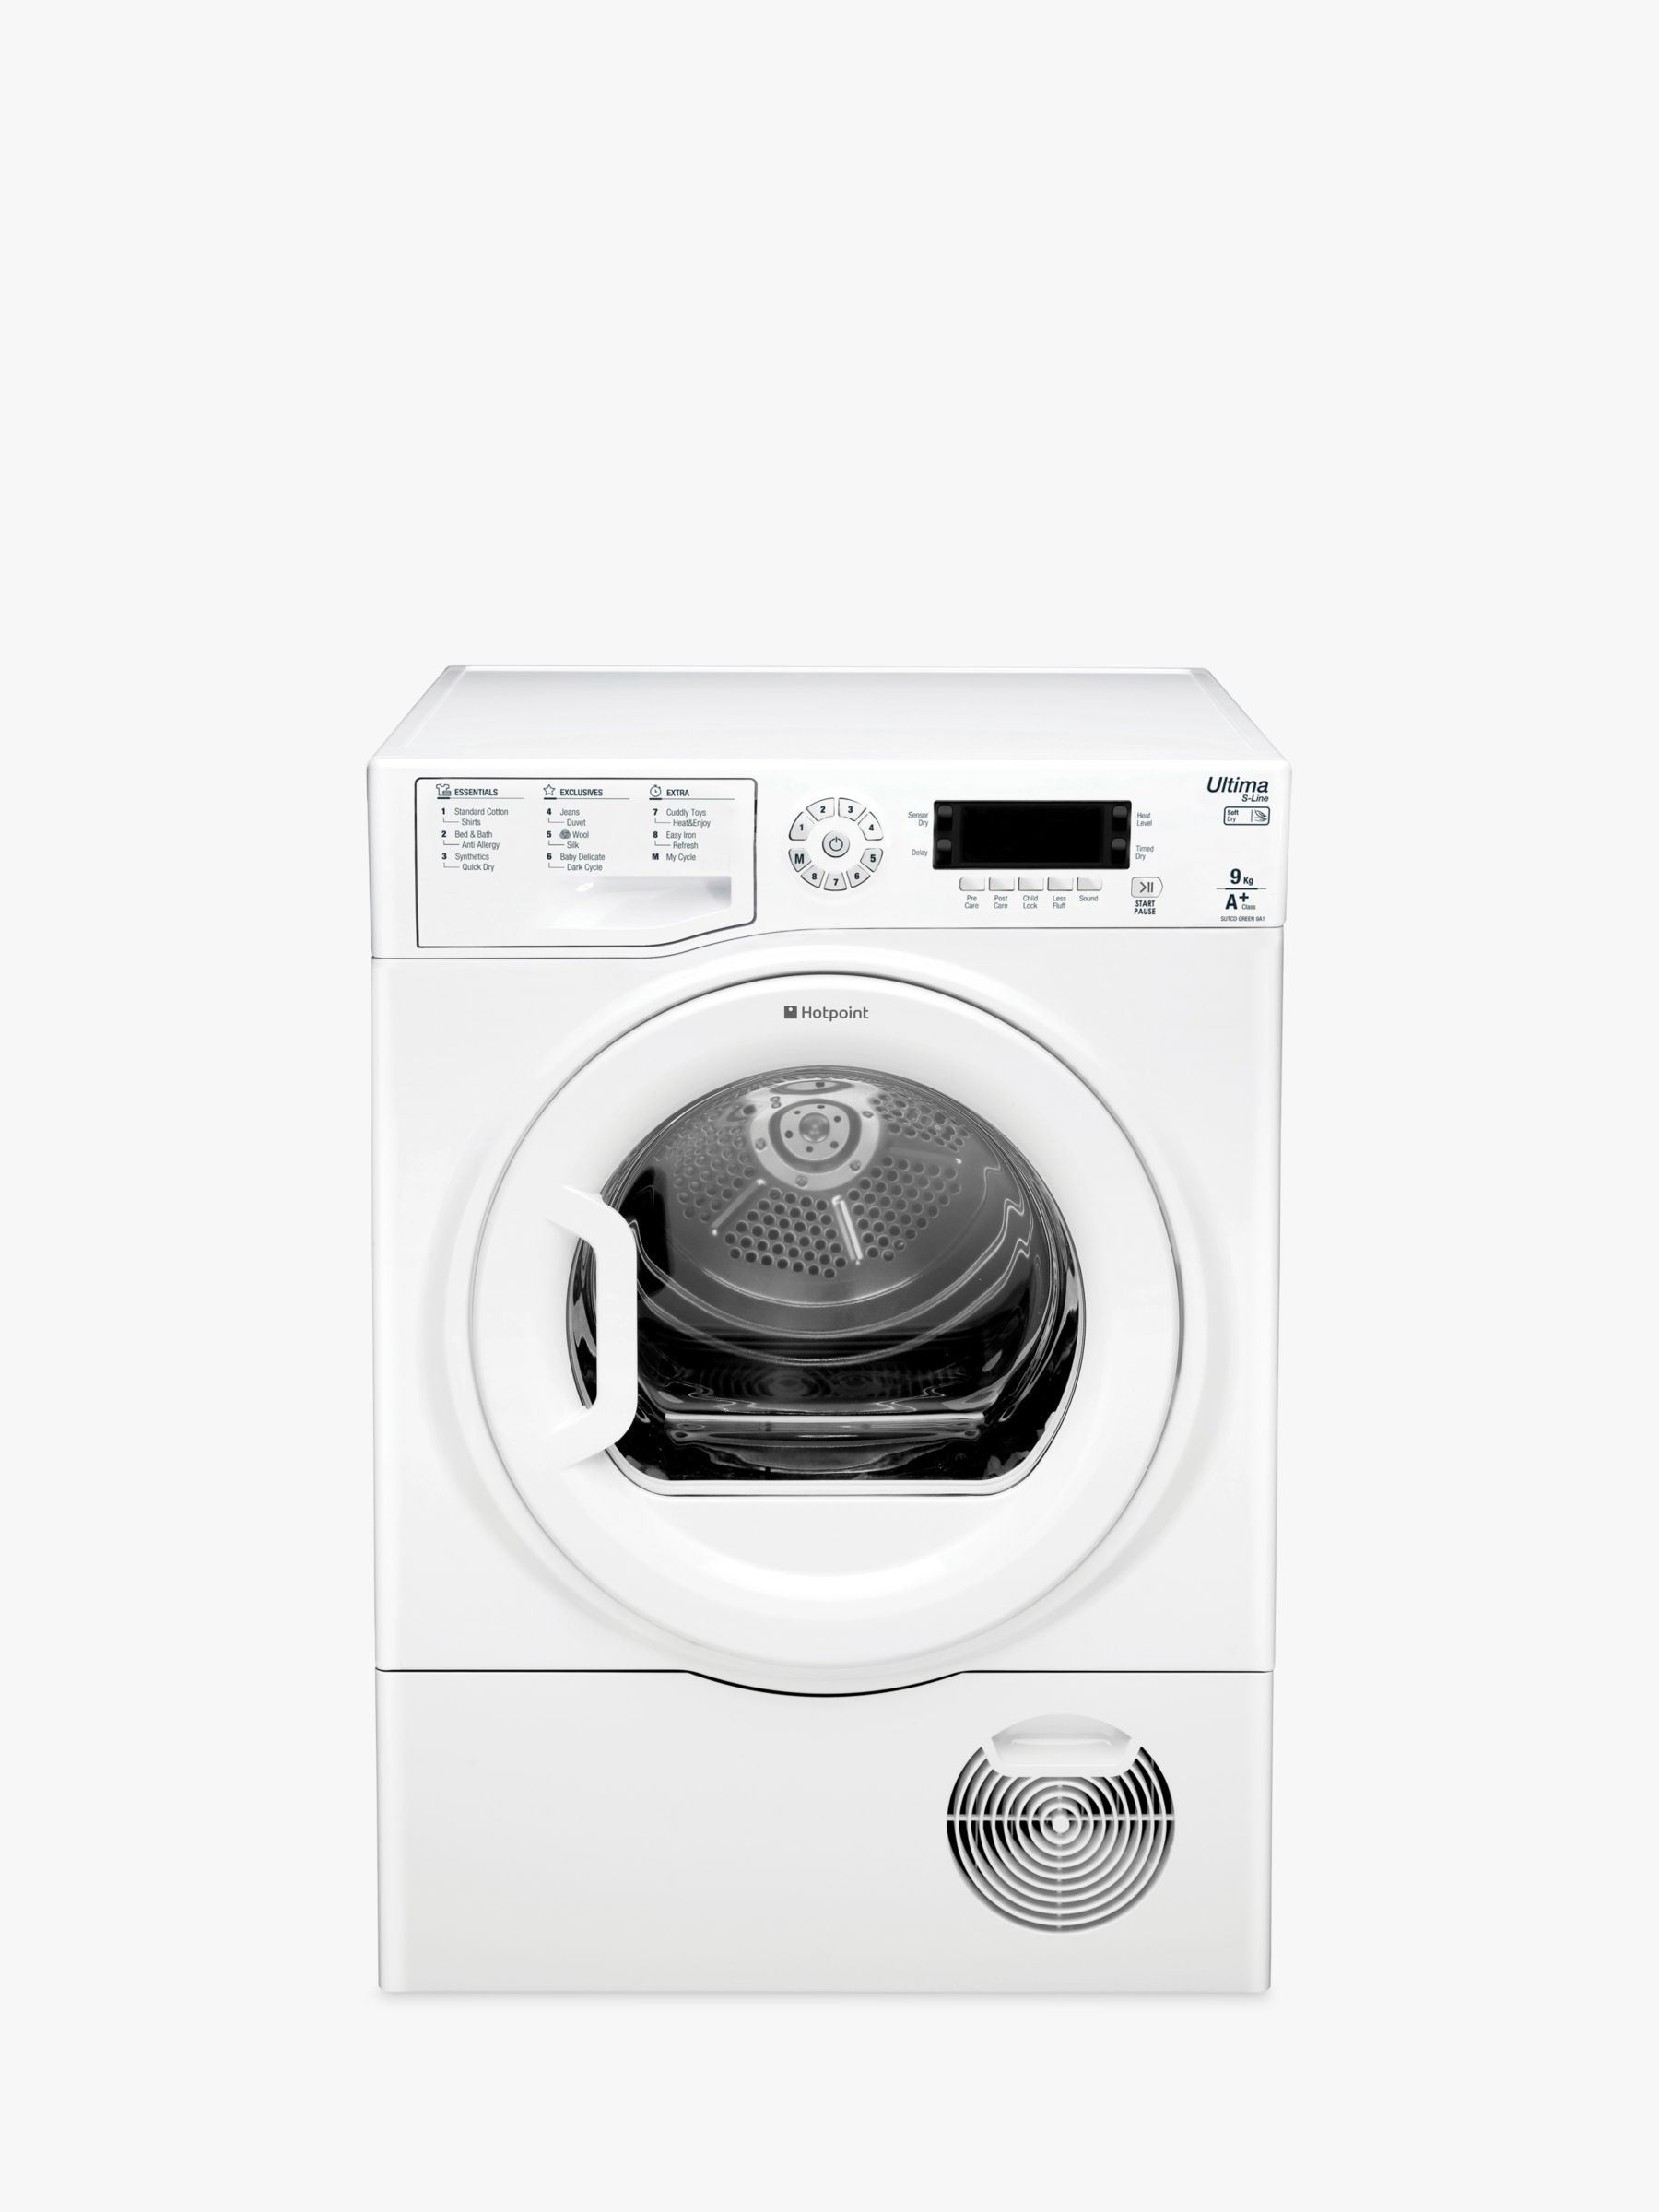 Hotpoint SUTCDGREEN9A1 Ultima Heat Pump Tumble Dryer, 9kg Load, A+ Energy Rating, White